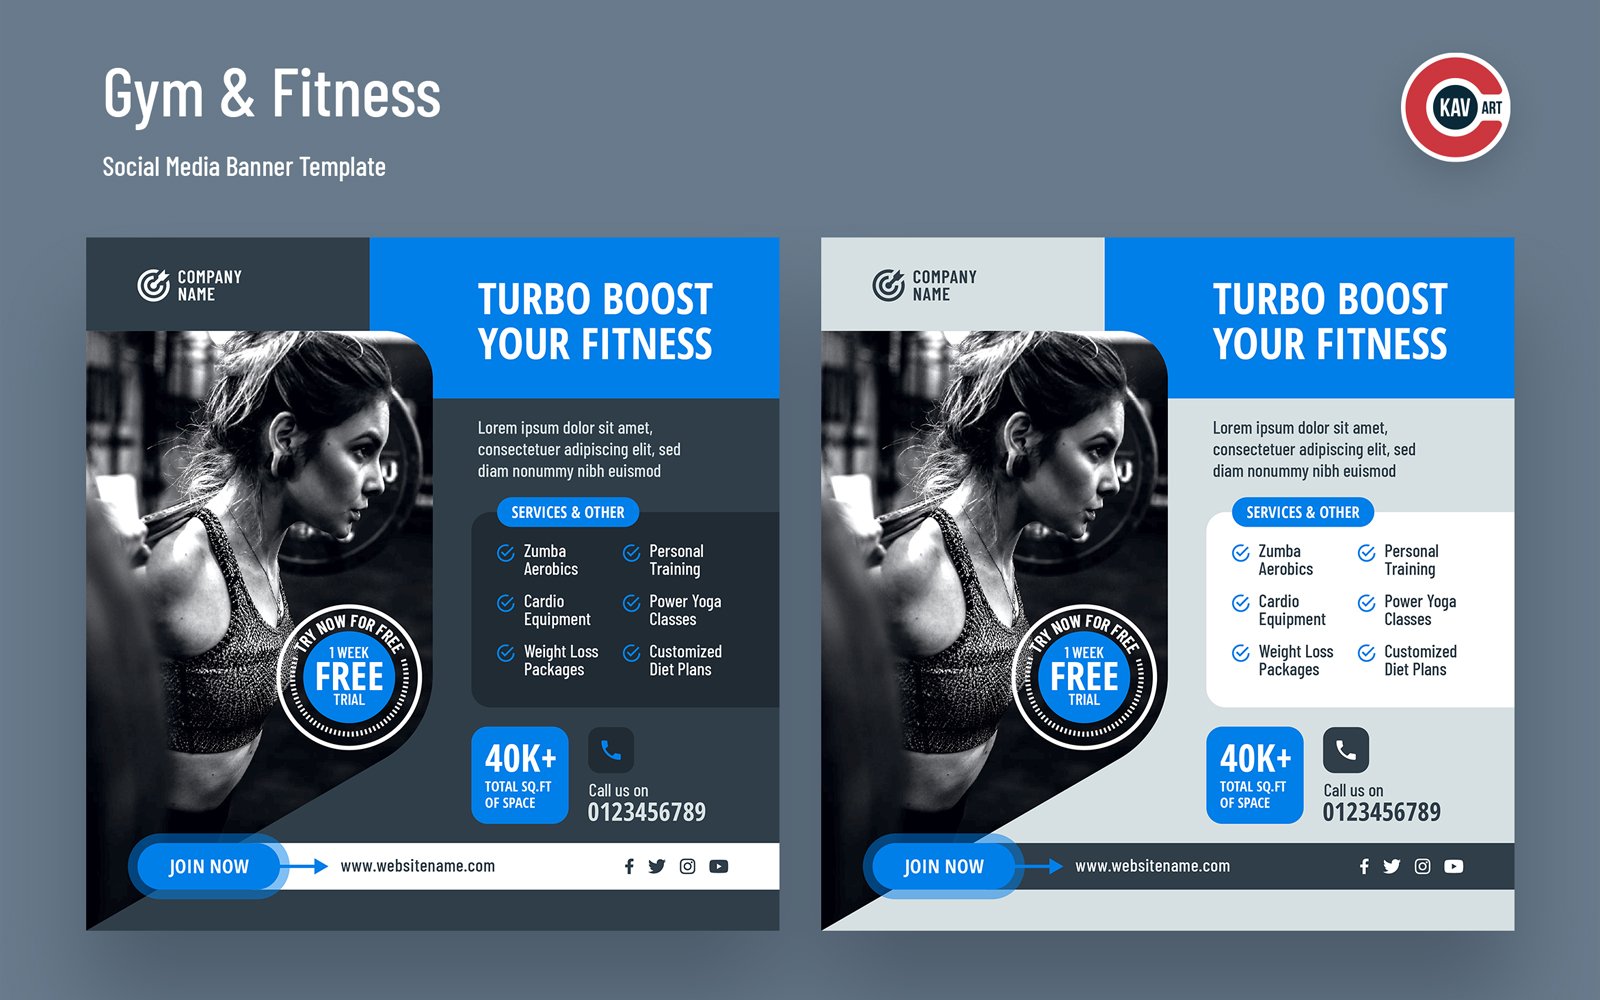 Gym and Fitness Social Media Banner Template - 00240